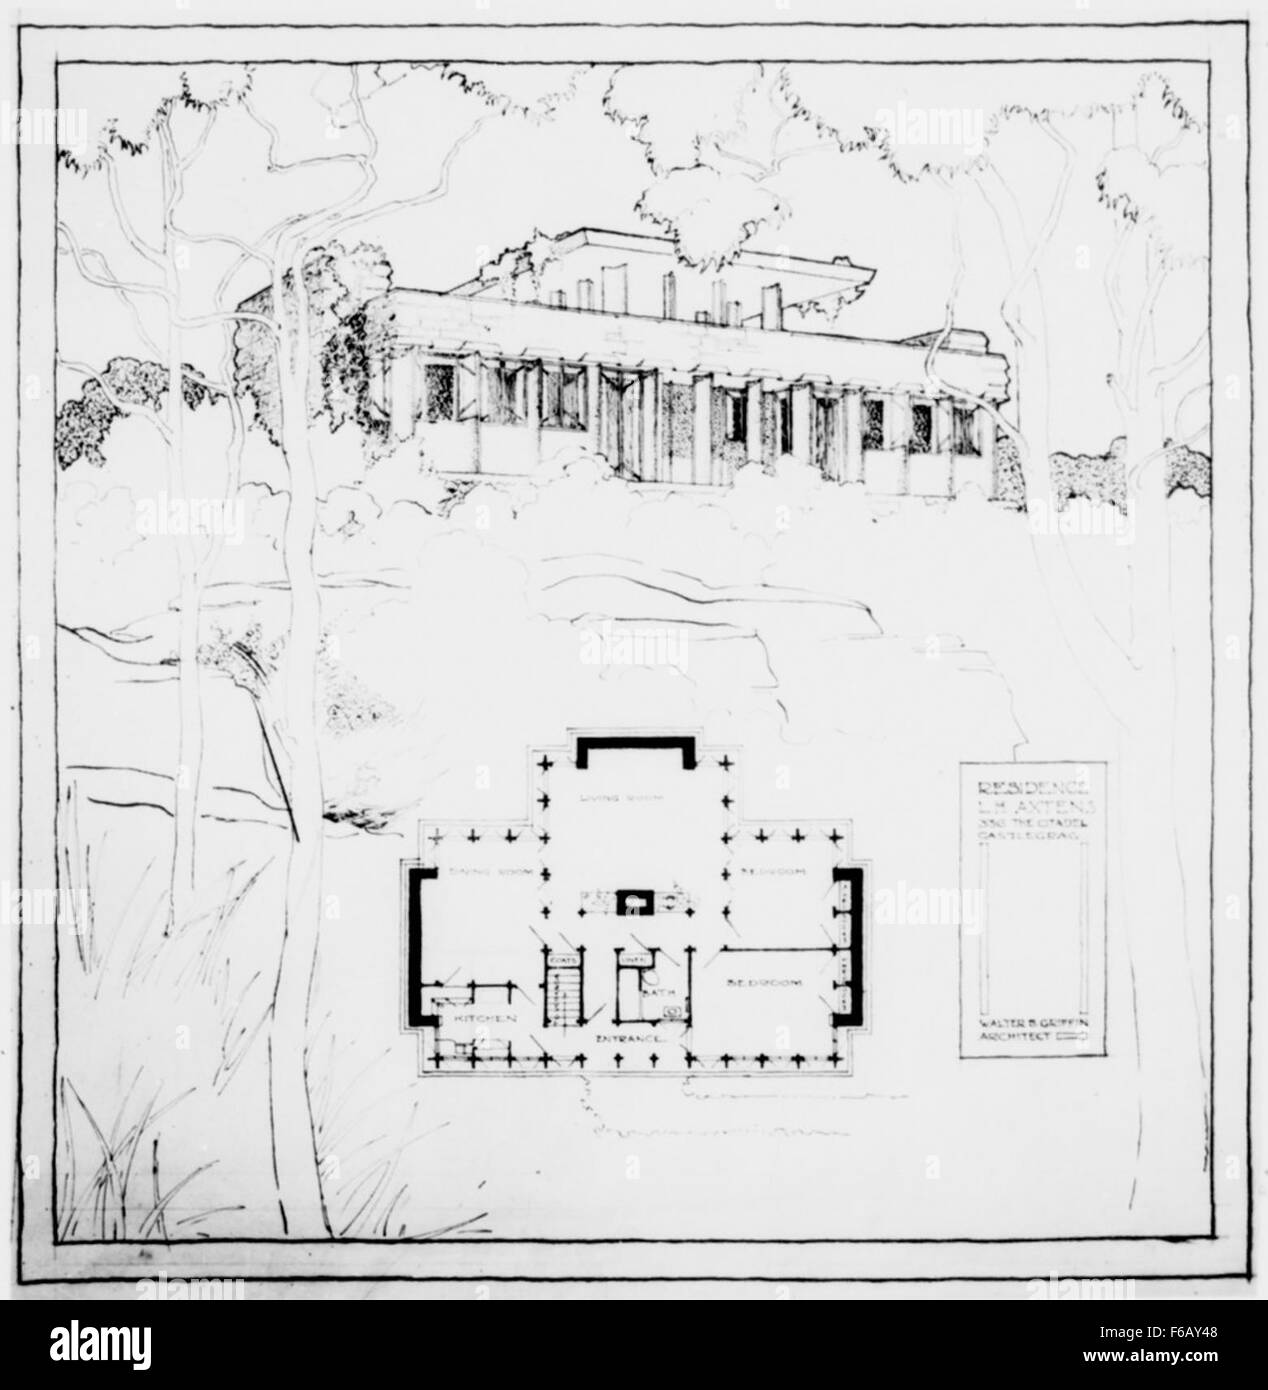 Residence of L. H. Axtens, Lot 336, The Citadel, Castlecrag, New South Wales, [2] Walter Burley Griffin Residence of L H Axtens, Lot 336, The Citadel, Castlecrag, Stock Photo